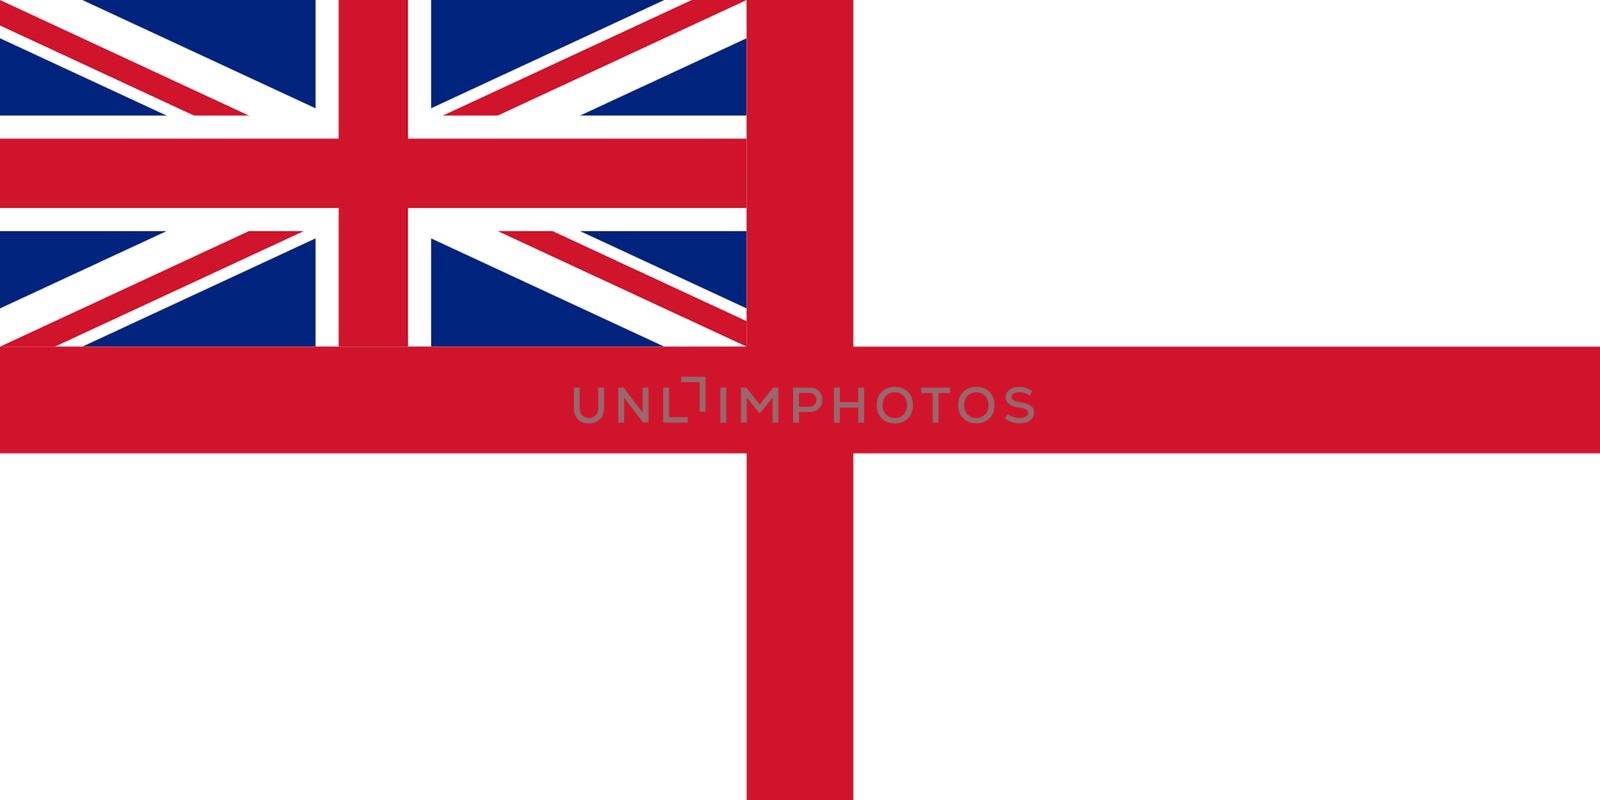 British Royal Navy ensign or flag in official colors.